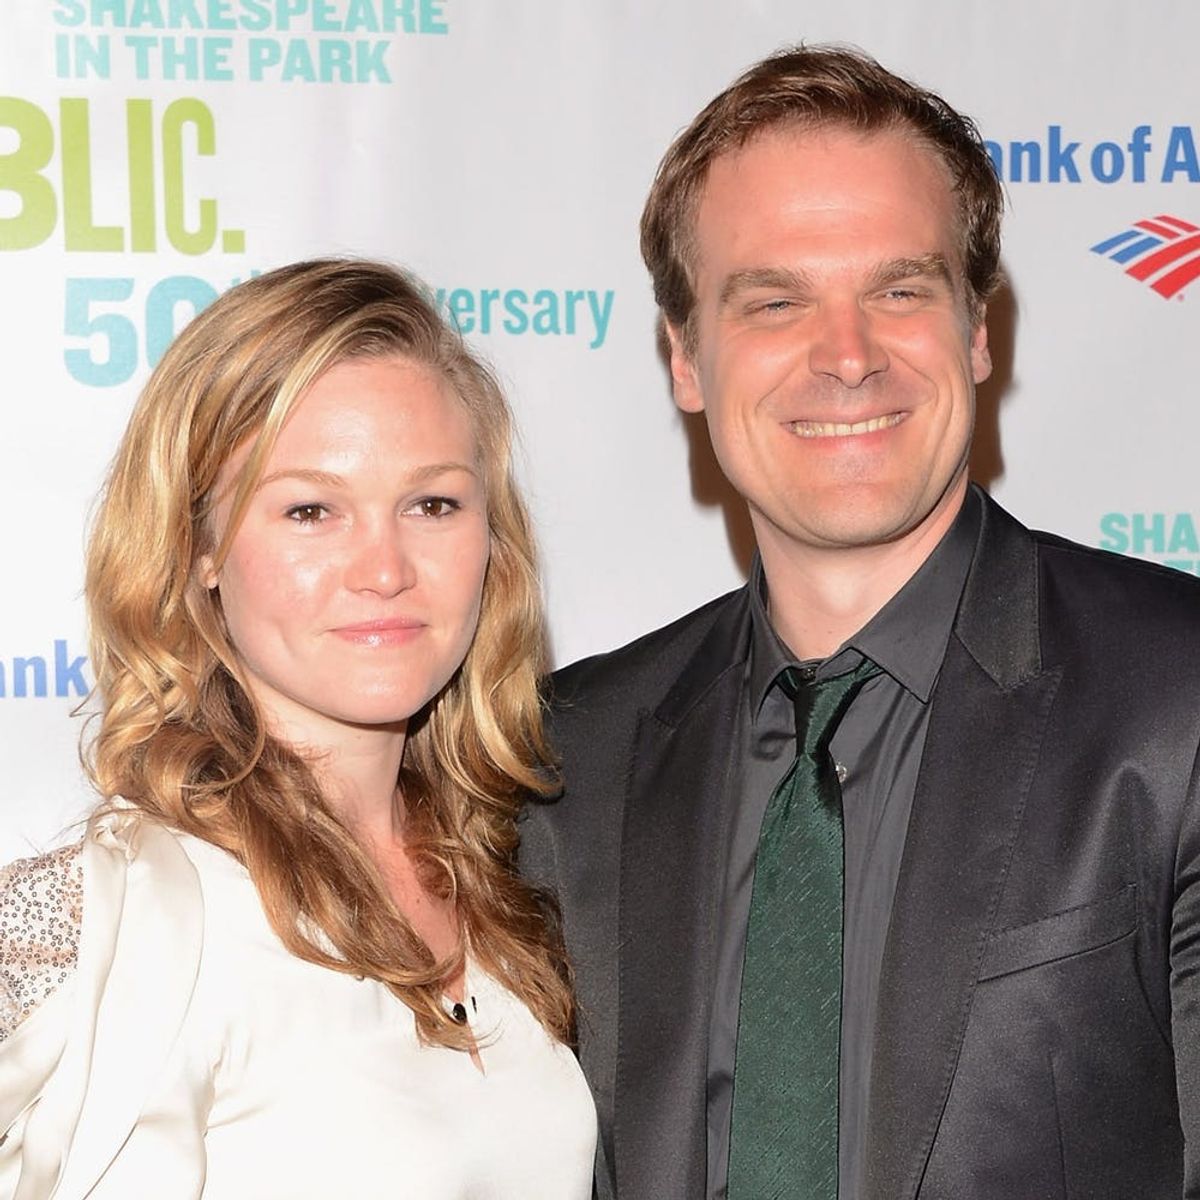 Julia Stiles Once Dated “Stranger Things” Star David Harbour and Our Minds Are Blown